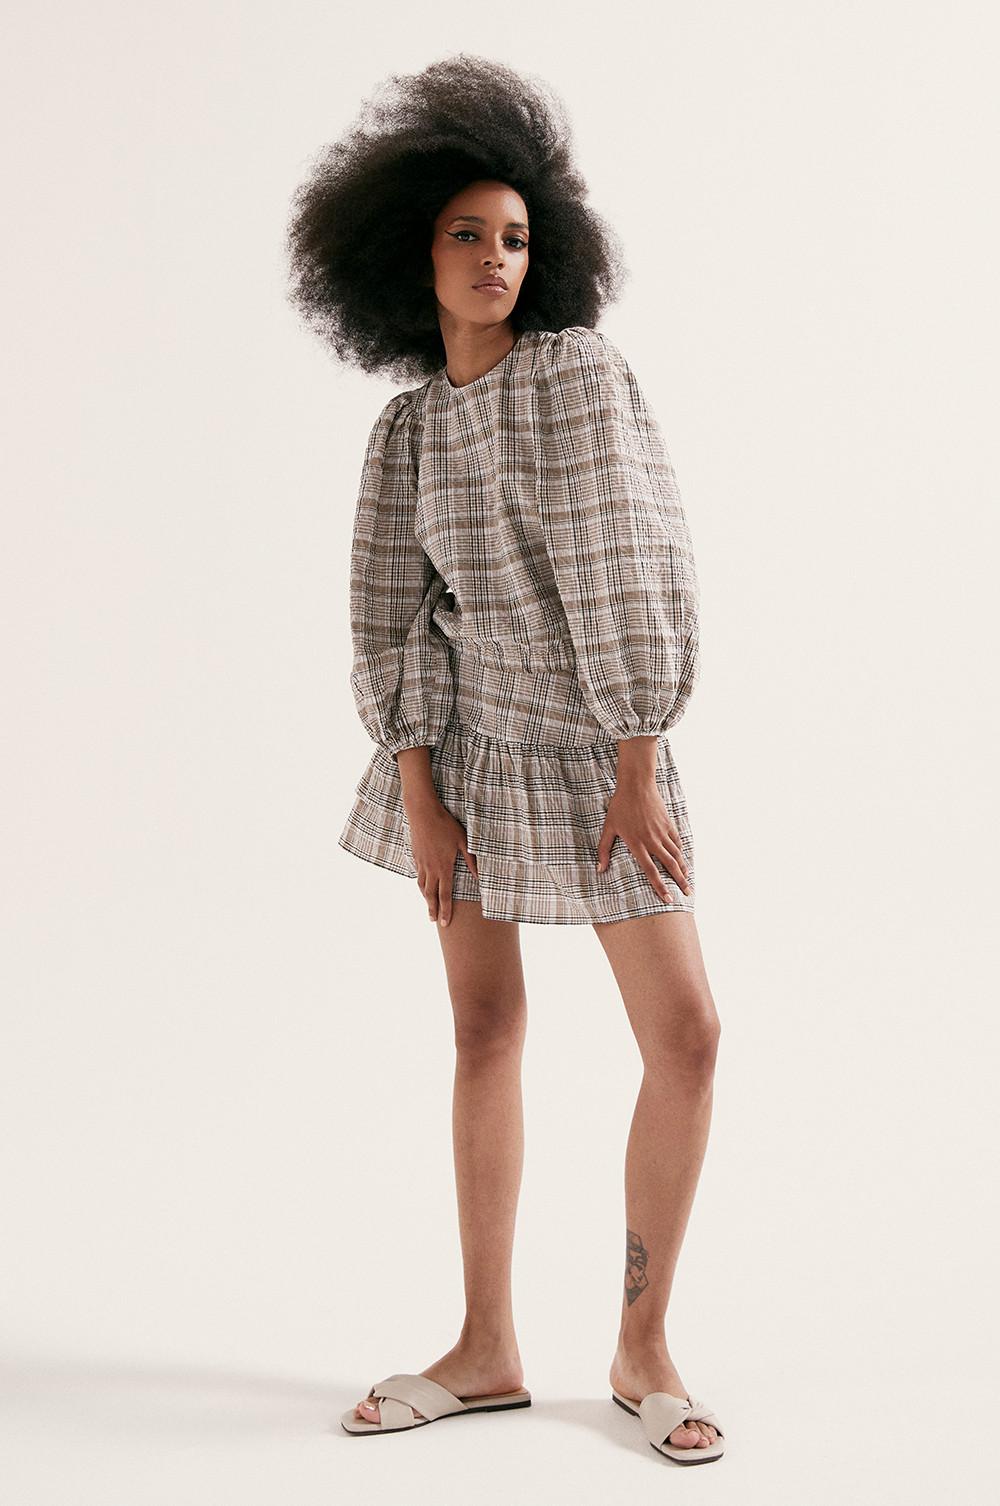 Model wearing Check Balloon Sleeve Blouse and Skirt